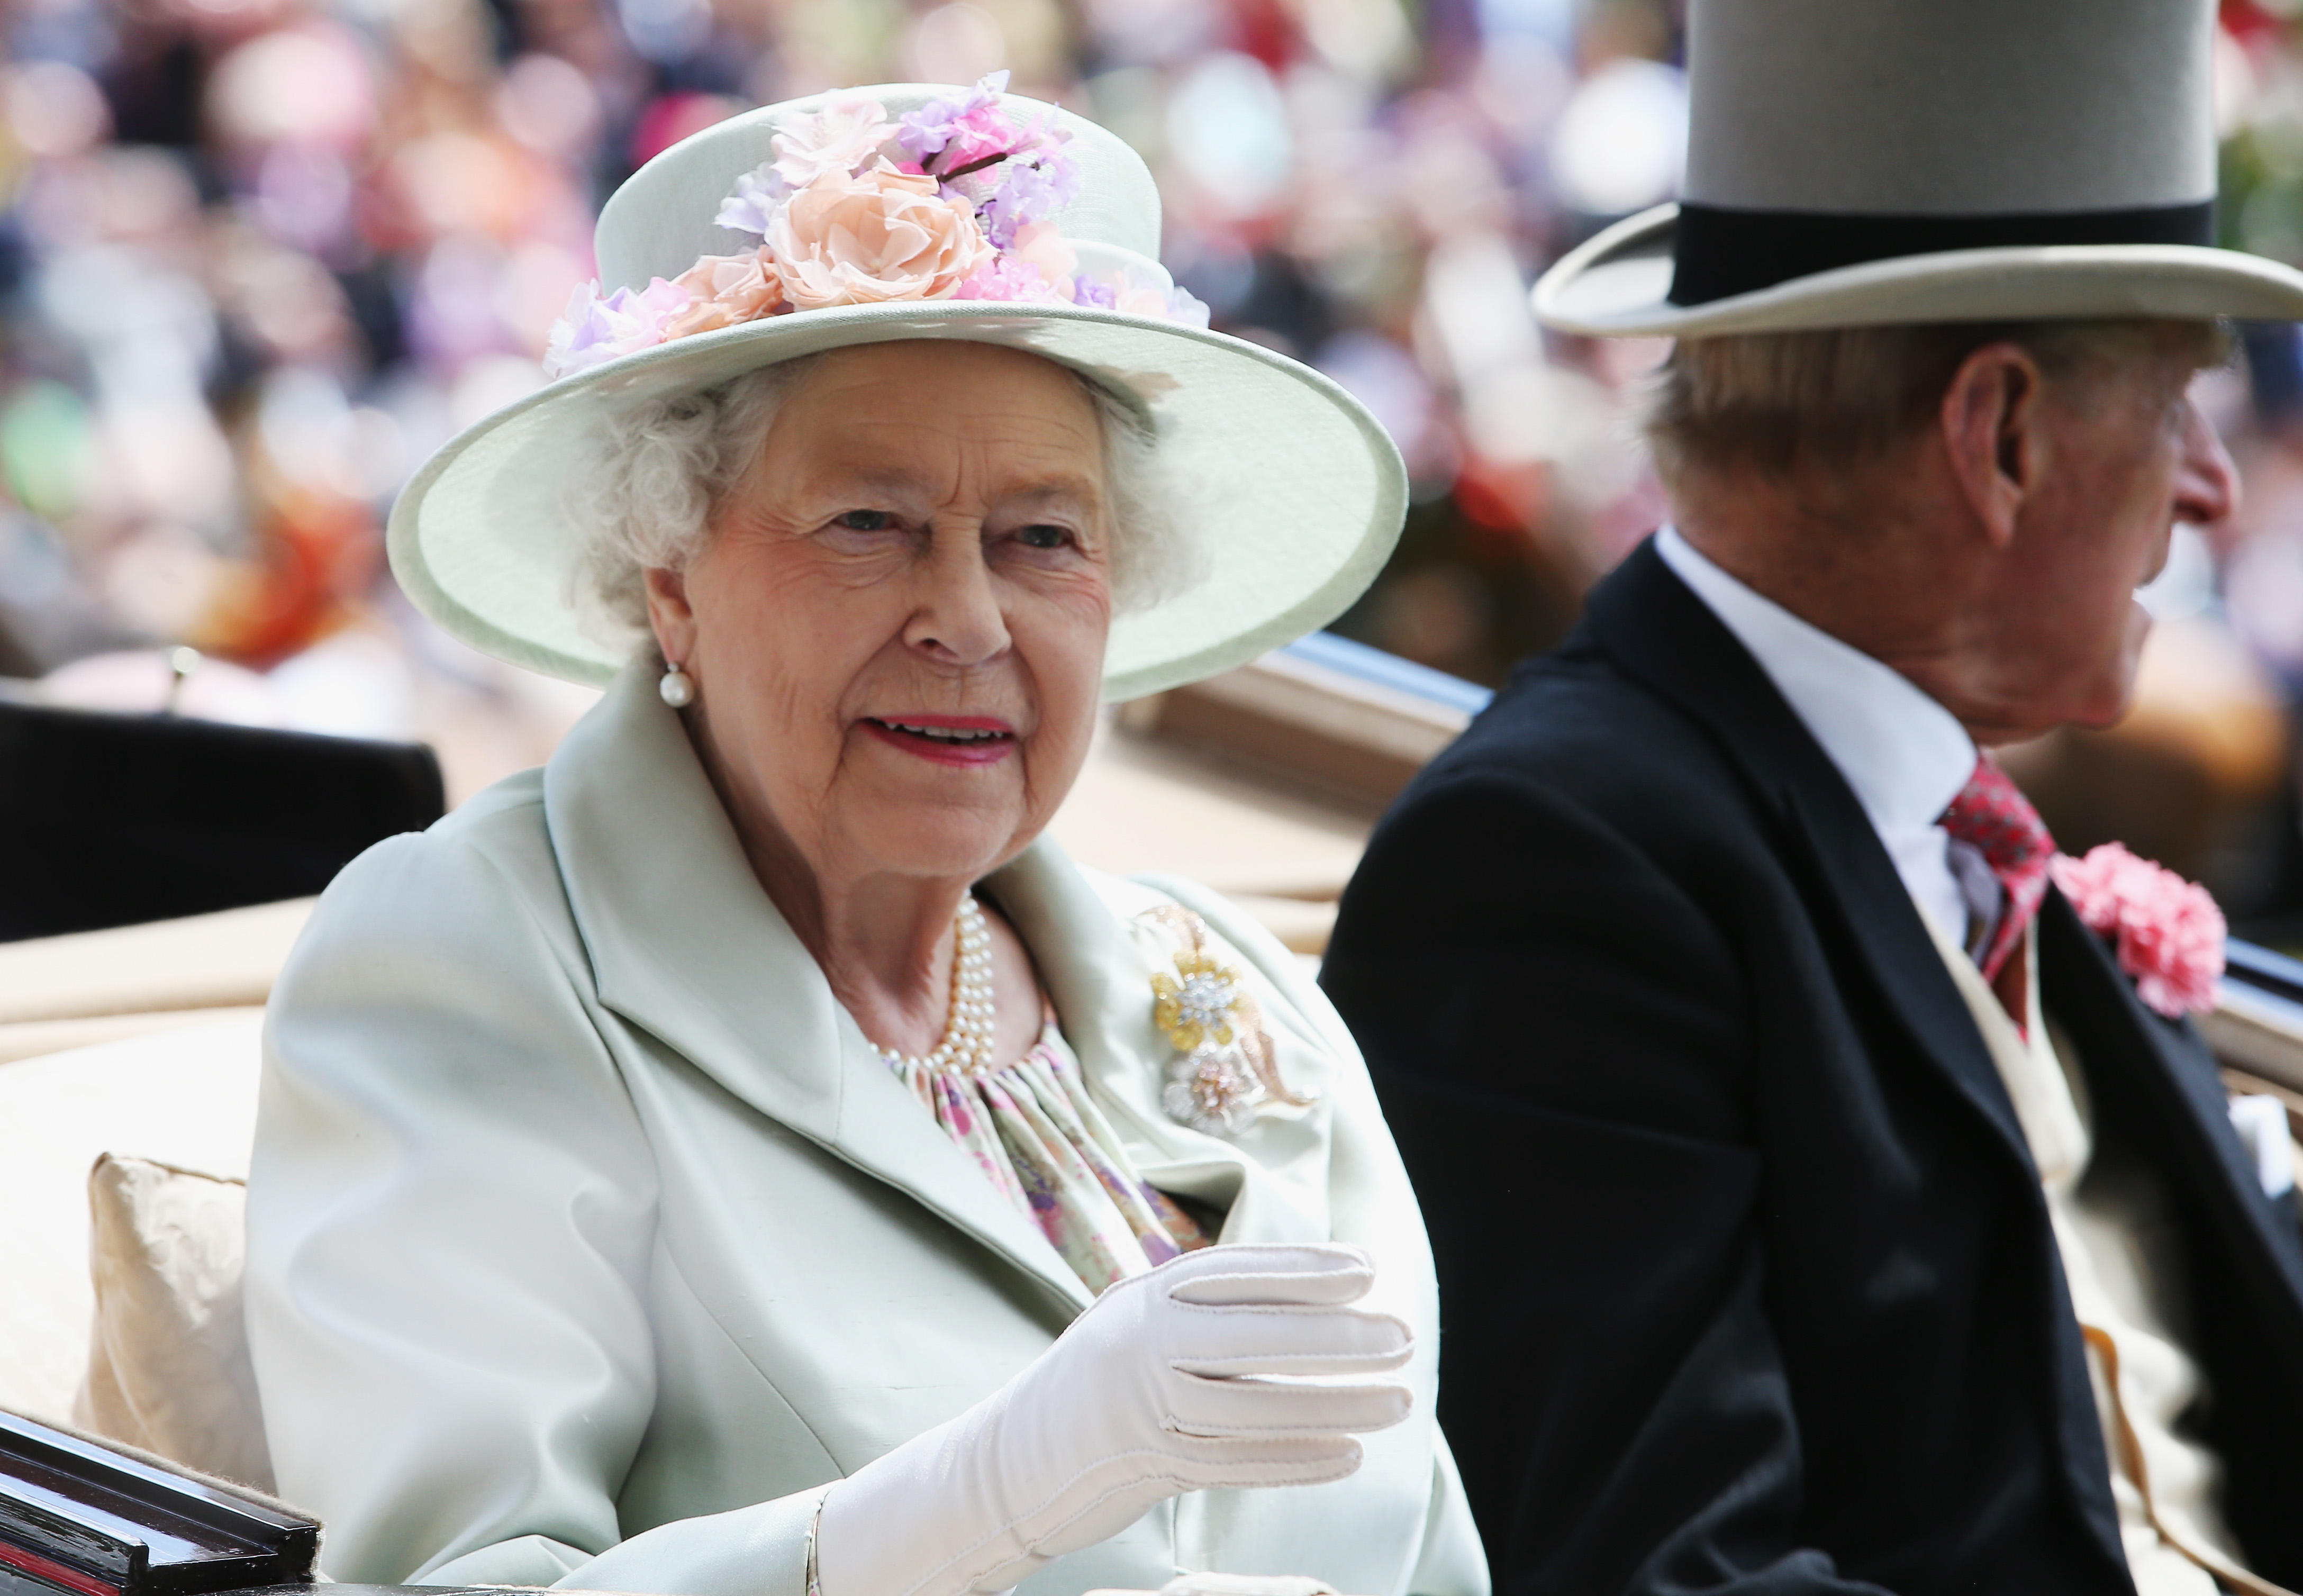 Queen Elizabeth II and Prince Philip, Duke of Edinburgh attend day two of Royal Ascot at Ascot Racecourse on June 18, 2014 in Ascot, England. (Chris Jackson -- Getty Images)